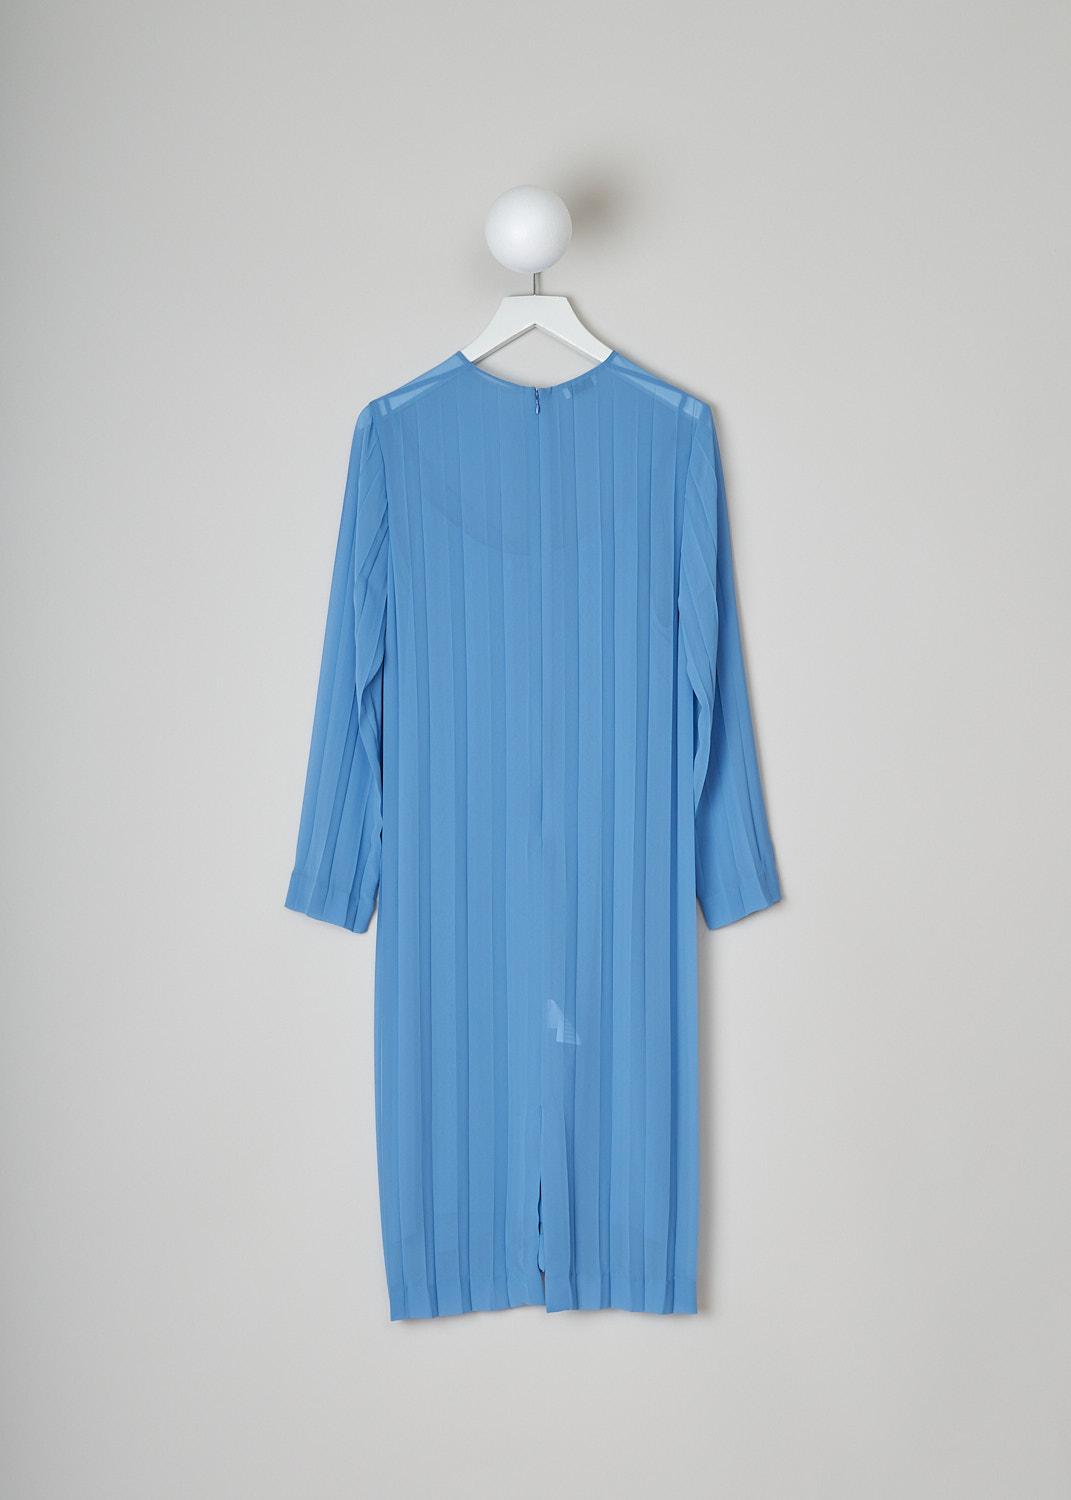 DRIES VAN NOTEN, SKY BLUE PLEATED DELAVITA DRESS, DELAVITA_6265_WW_DRESS_SKY, Blue, Back, This sky blue semi sheer Delavita dress is fully pleated. The dress has a high round neckline an three-quarter sleeves. The straight hemline reaches to below the knee. In the back, a hook-and-eye and concealed zip in the centre function as the closure option. The dress comes with a separate slip dress in the same fabric and color.   
